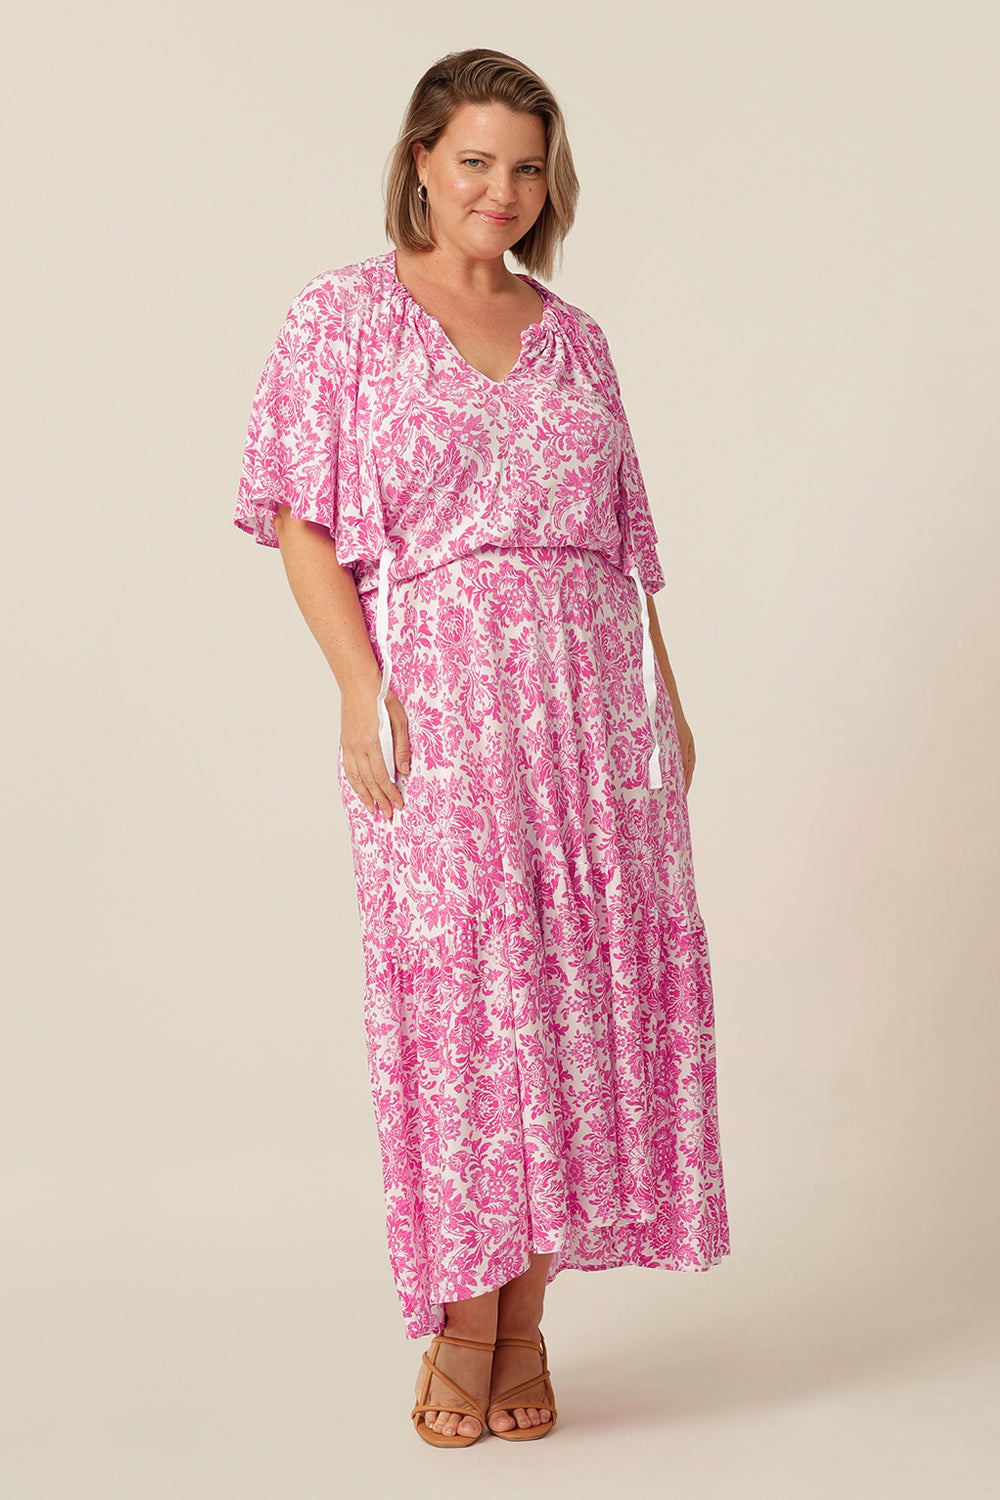 halter neck, jersey maxi dress with ruffle on hem - pink and white dresses maxi